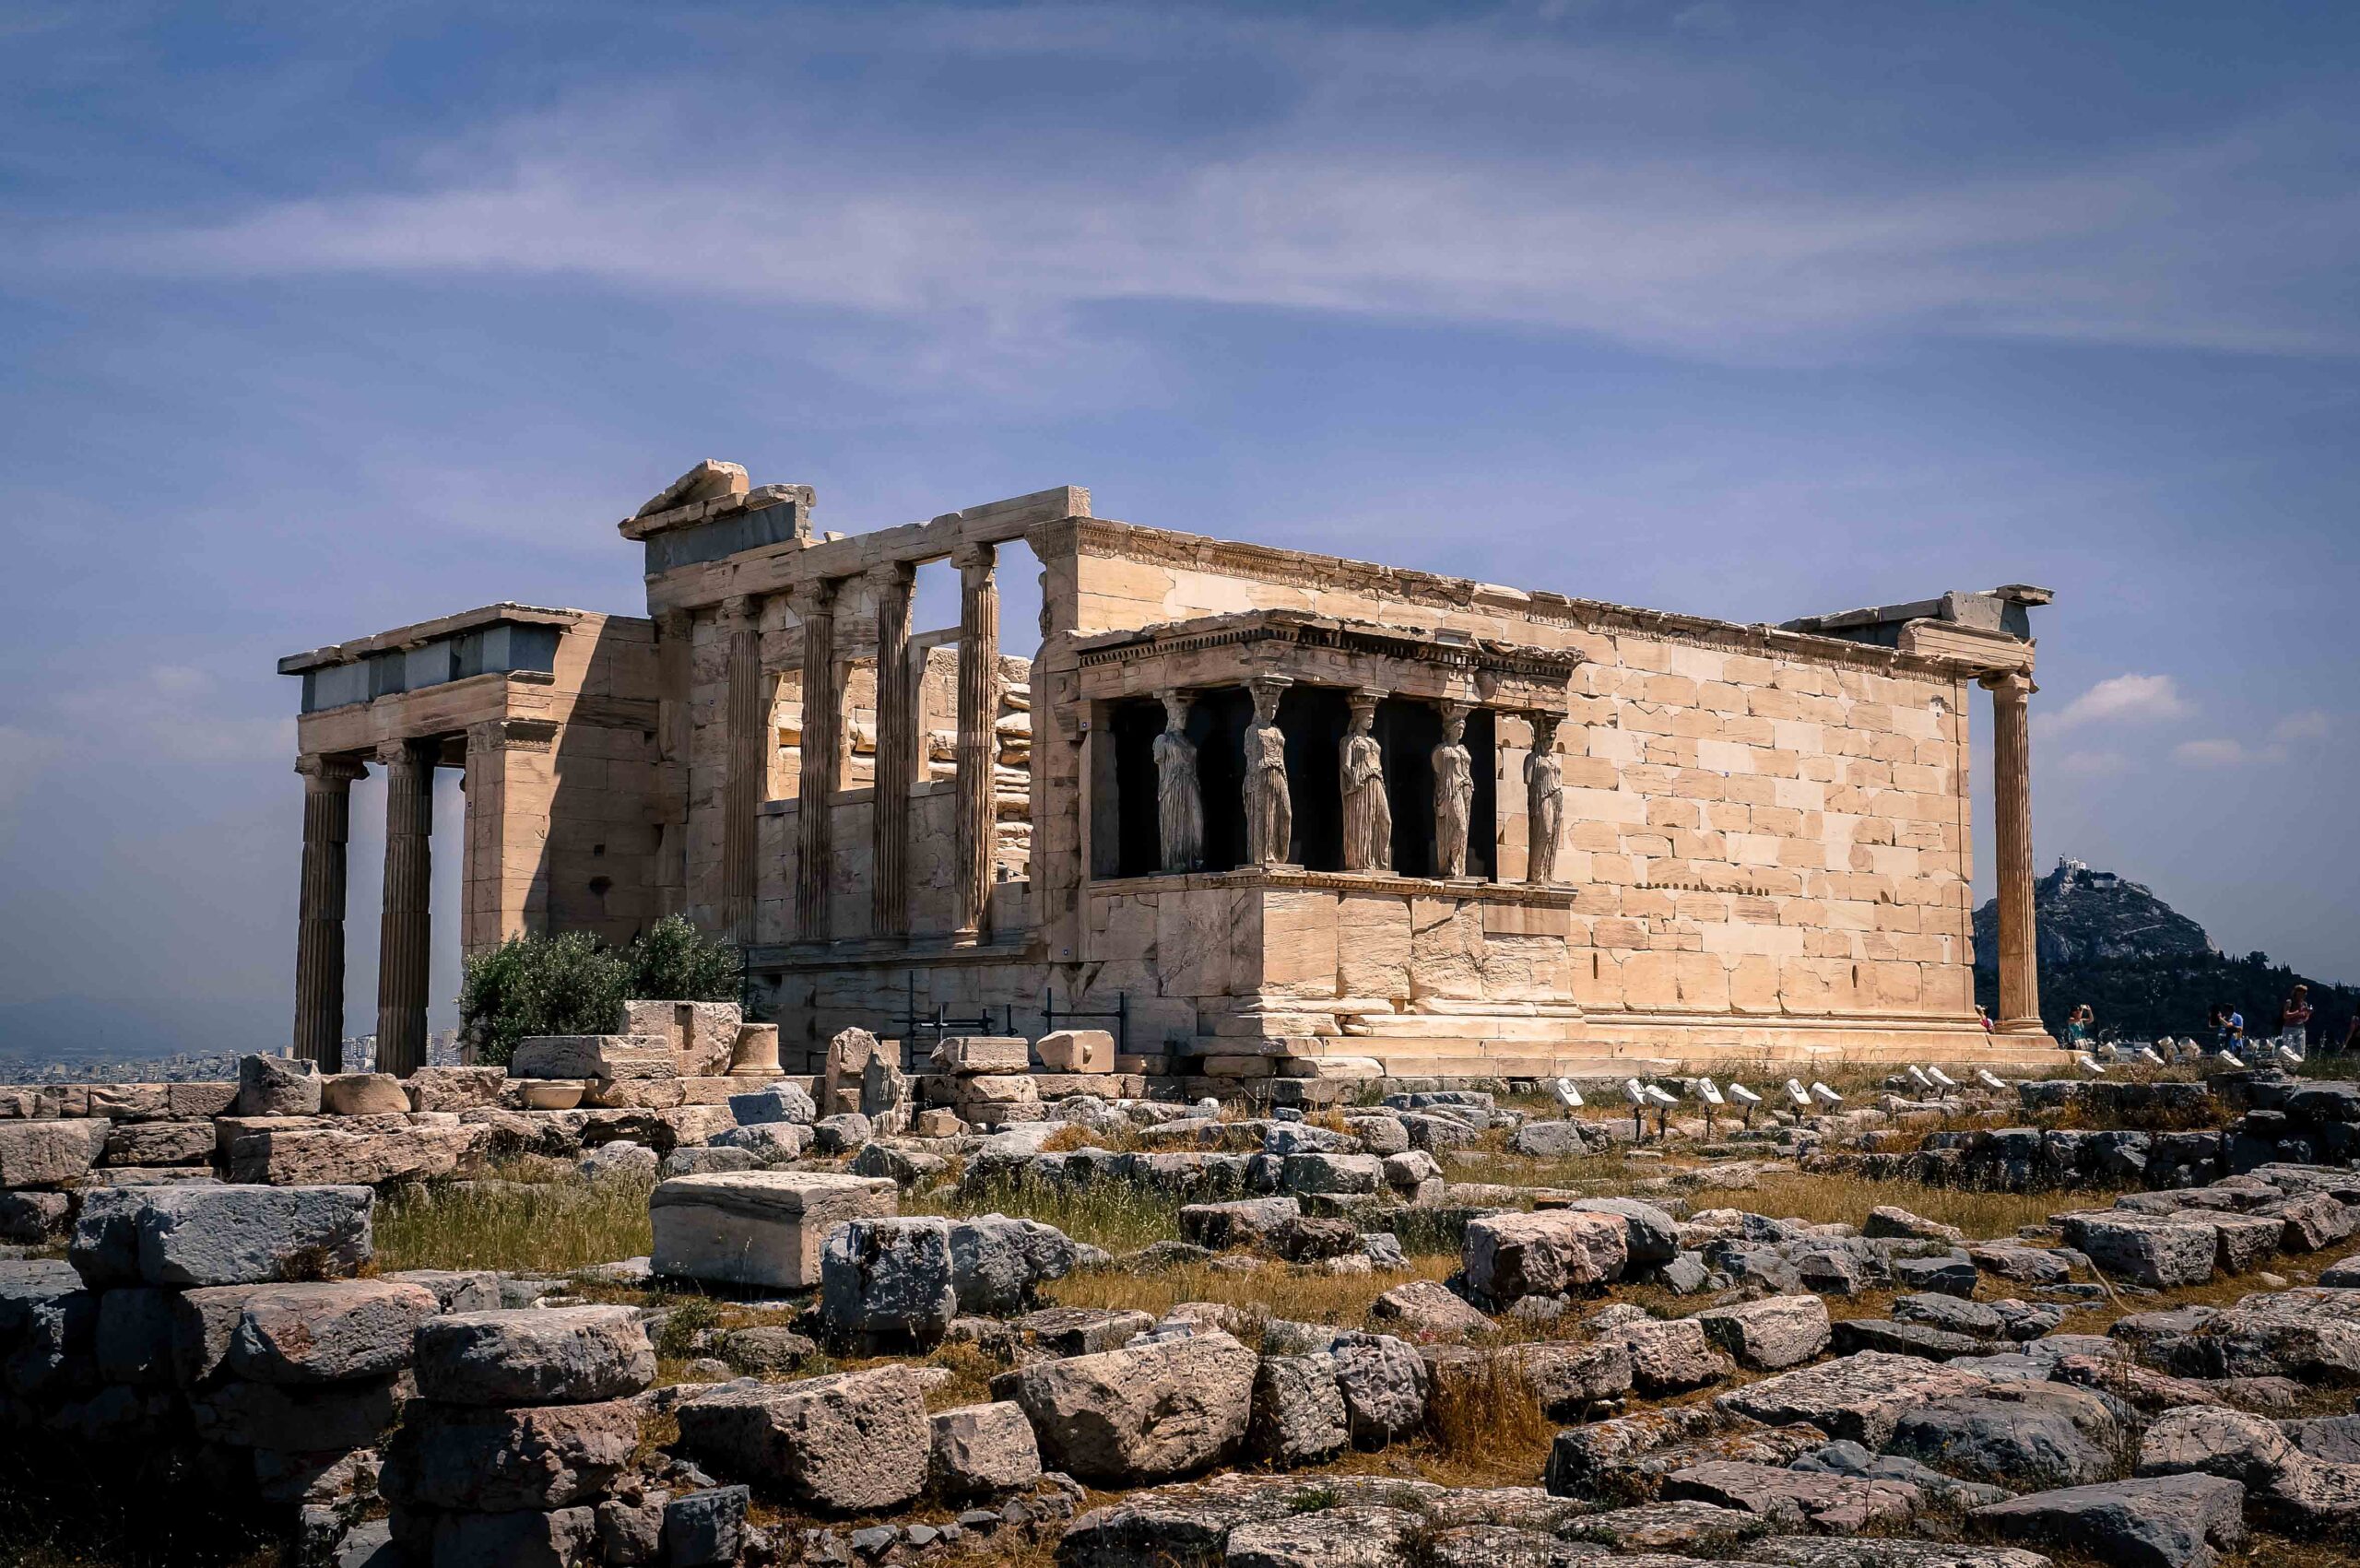 The area around the Acropolis is covered with pieces of stone